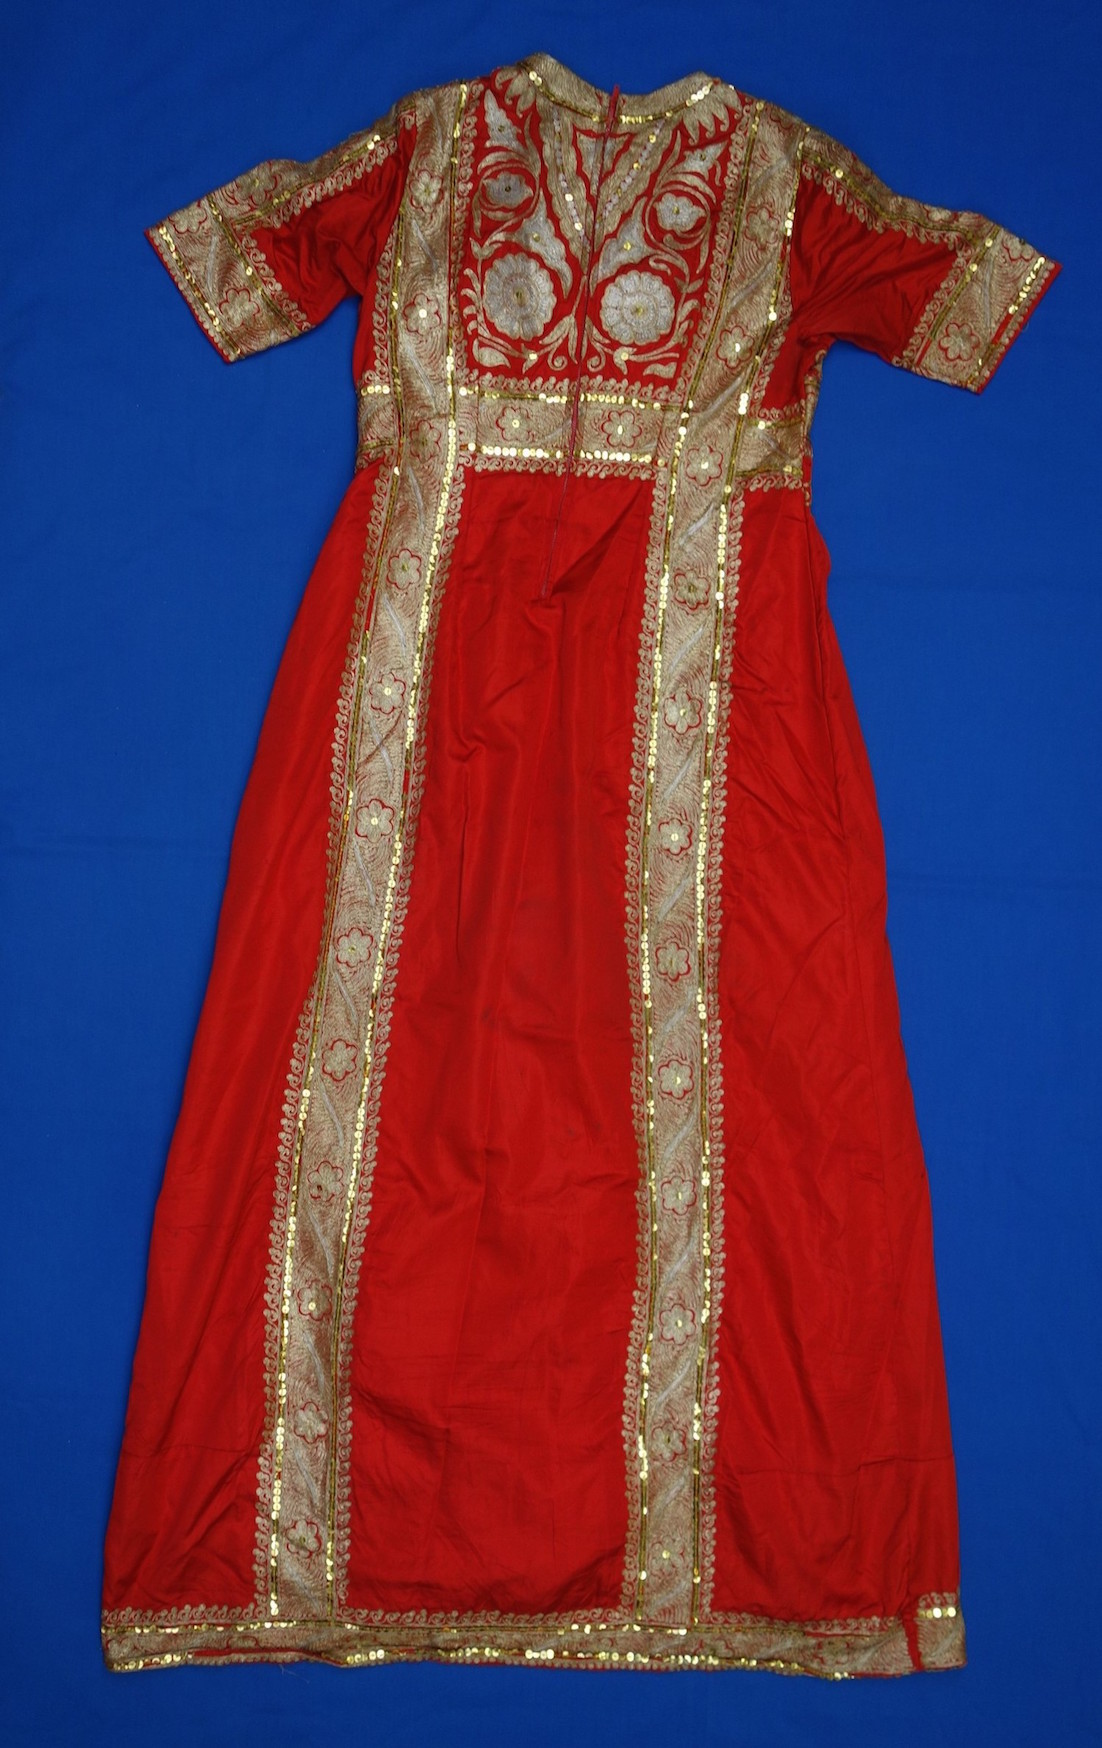 Woman's dress from Saudi Arabia. TRC 2005.0077 3. Modern fustan made from red Indian silk heavily decorated with machine embroidery in gold and silver threads and gold sequins. The garment is decorated with long borders of flowers, palm leaves, scrolls. It has a central panel with palm trees, Arabian daggers, traditional pine and leaf patterns.